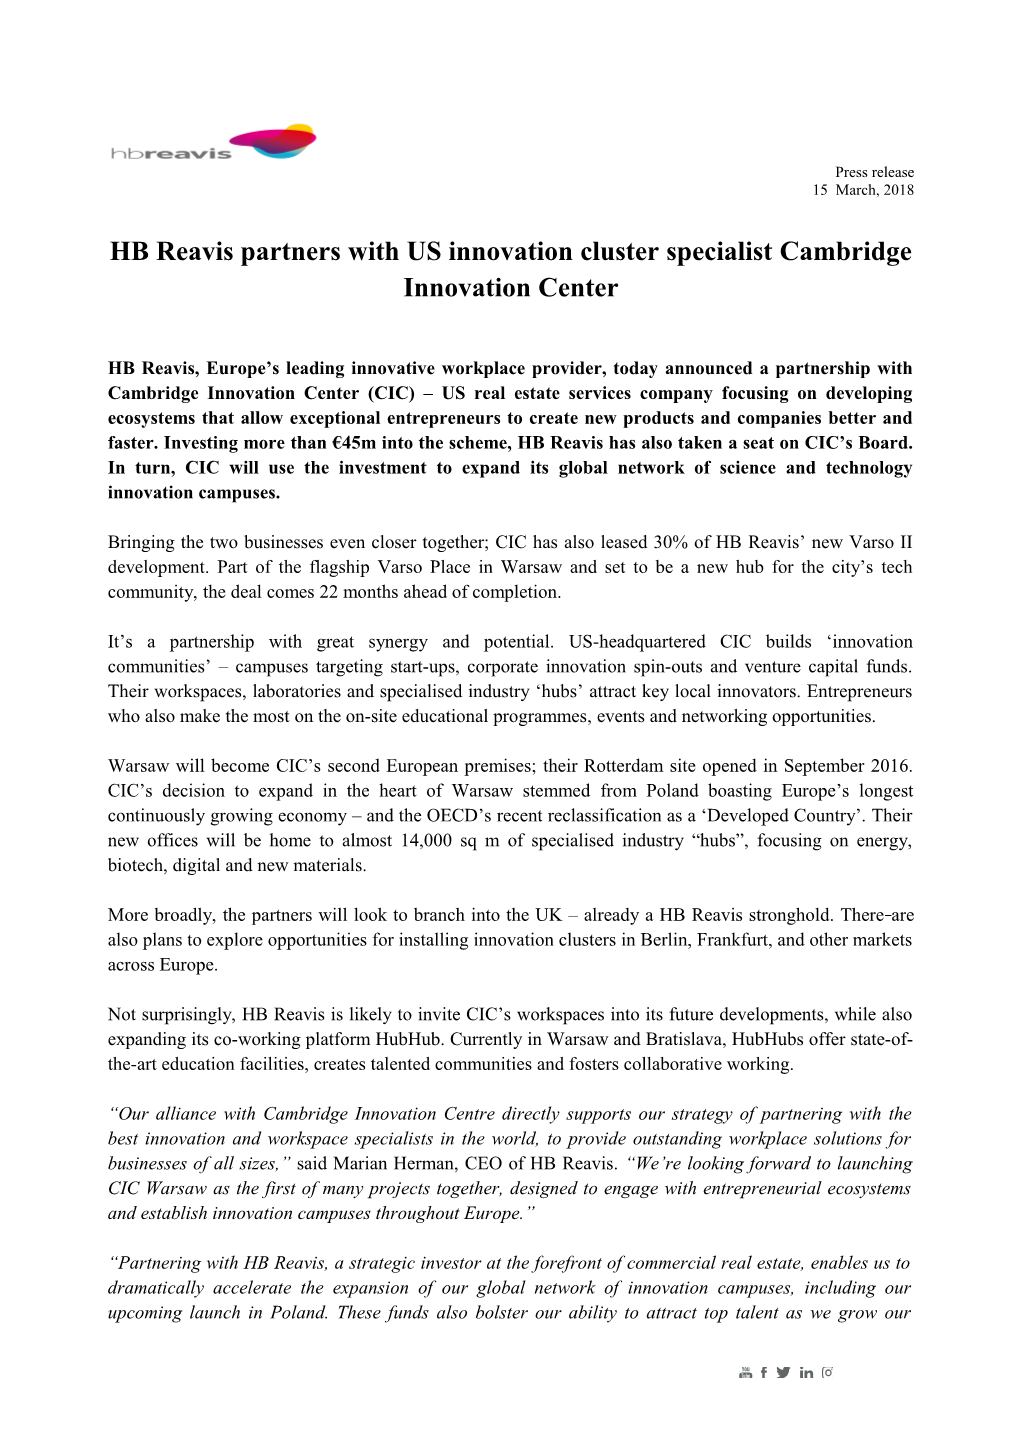 HB Reavis Partners with US Innovation Cluster Specialist Cambridge Innovation Center